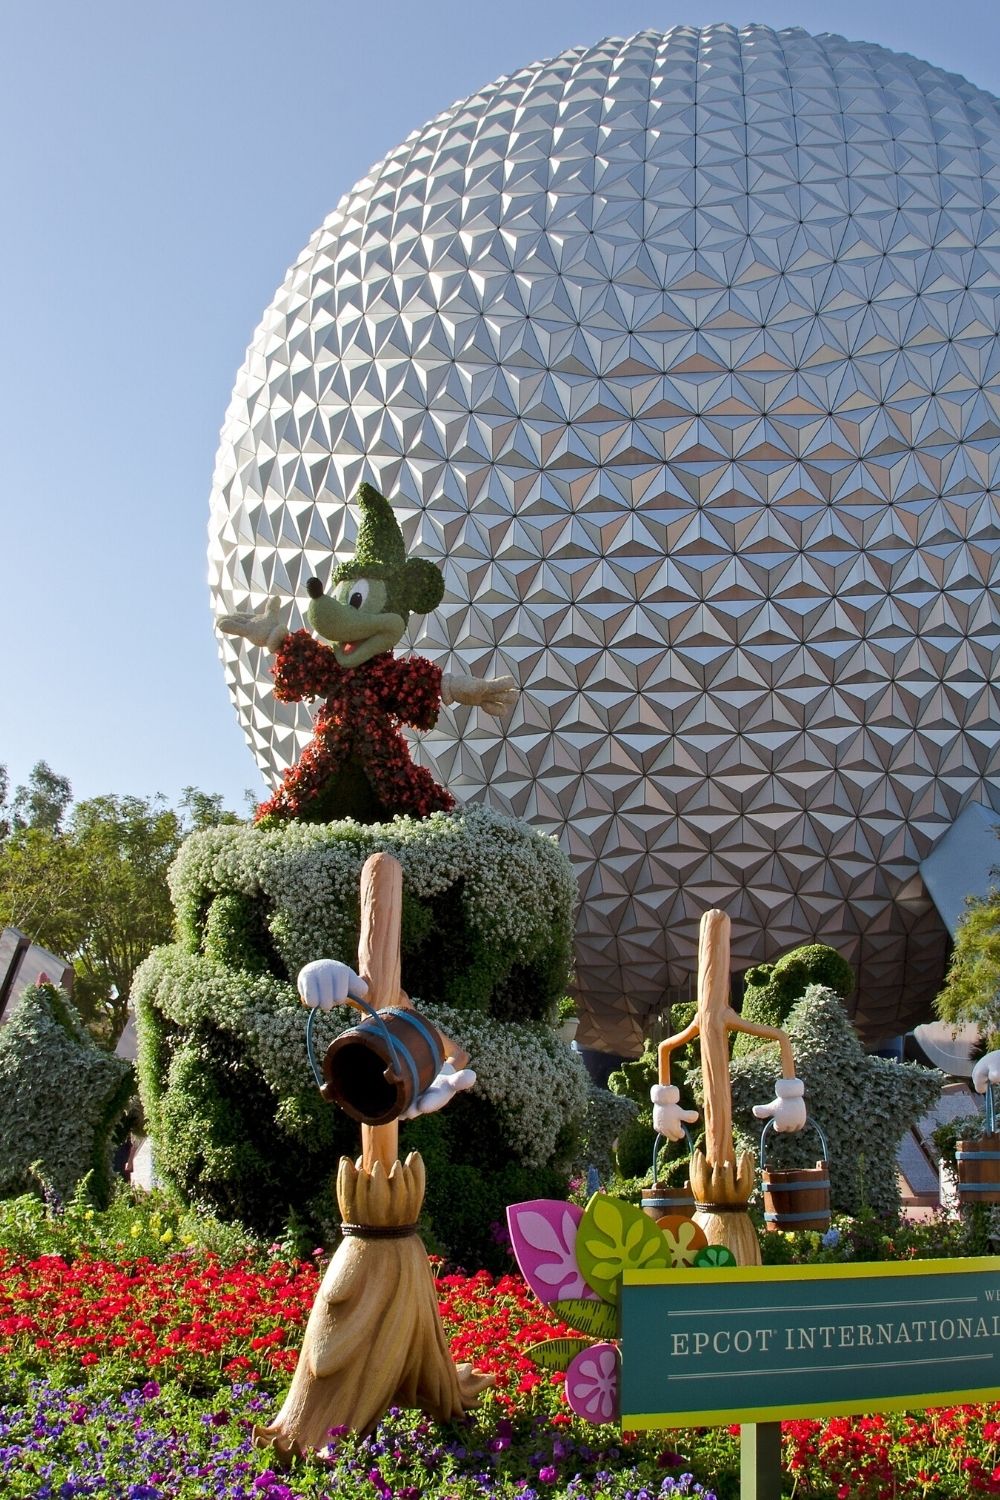 Spaceship Earth at Epcot, with a Mickey topiary in front.